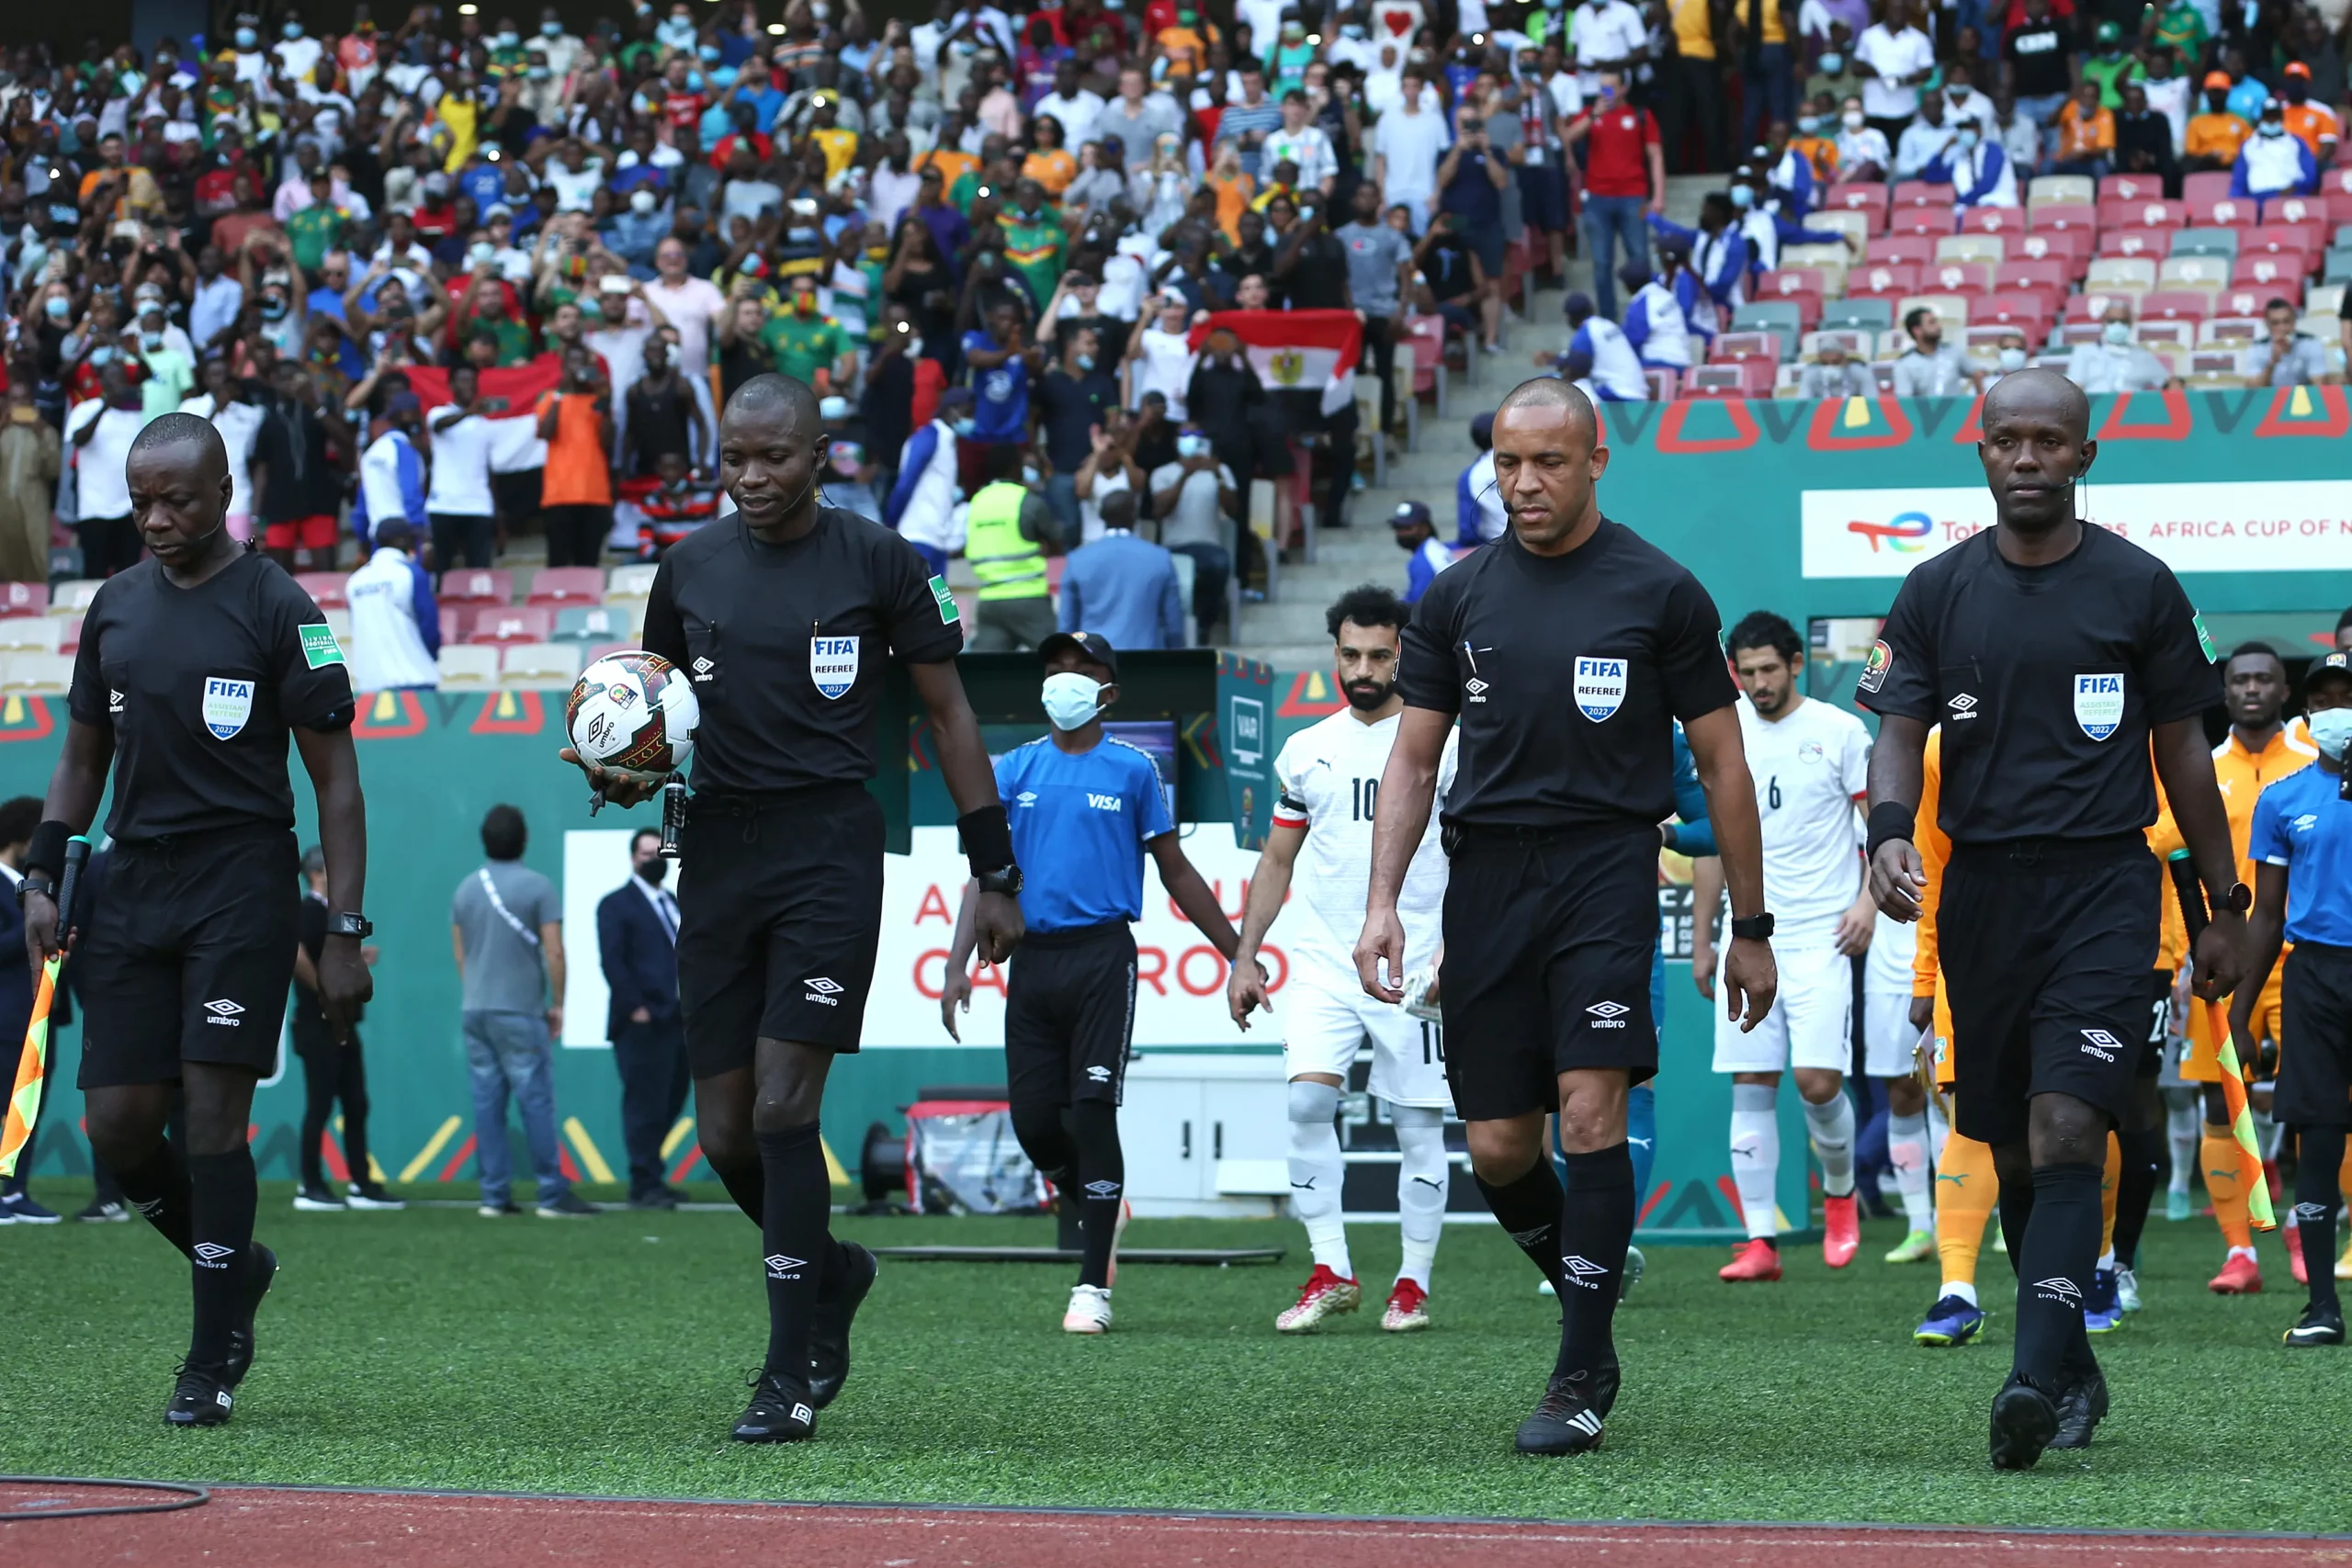 CAF AFCON Cote d'Ivoire 2023 - A close look at all match officials for Africa's prestigious tournament